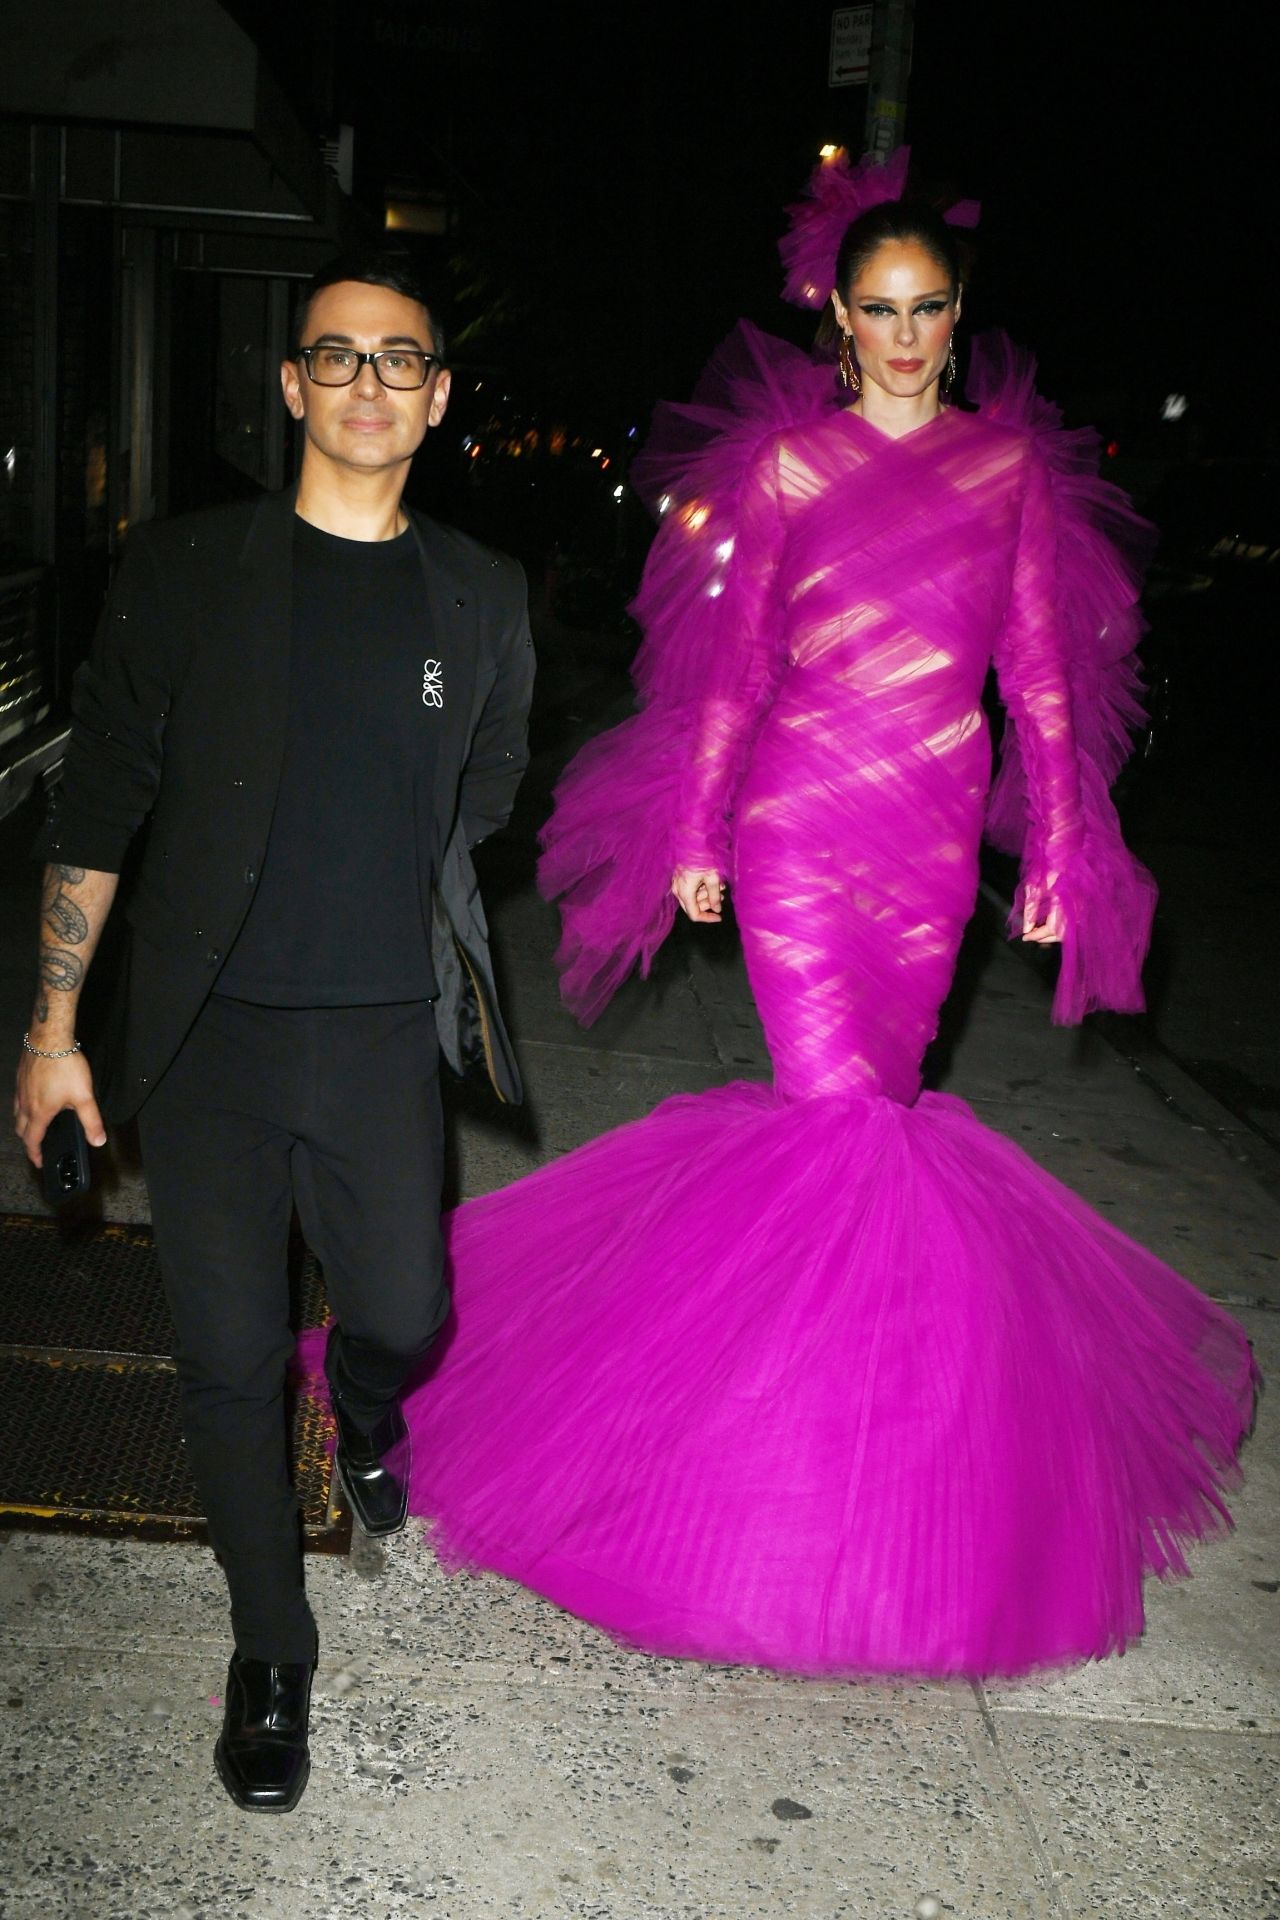 COCO ROCHA AT THE THE MULBERRY BAR FOR A MET GALA AFTER PARTY IN NEW YORK6